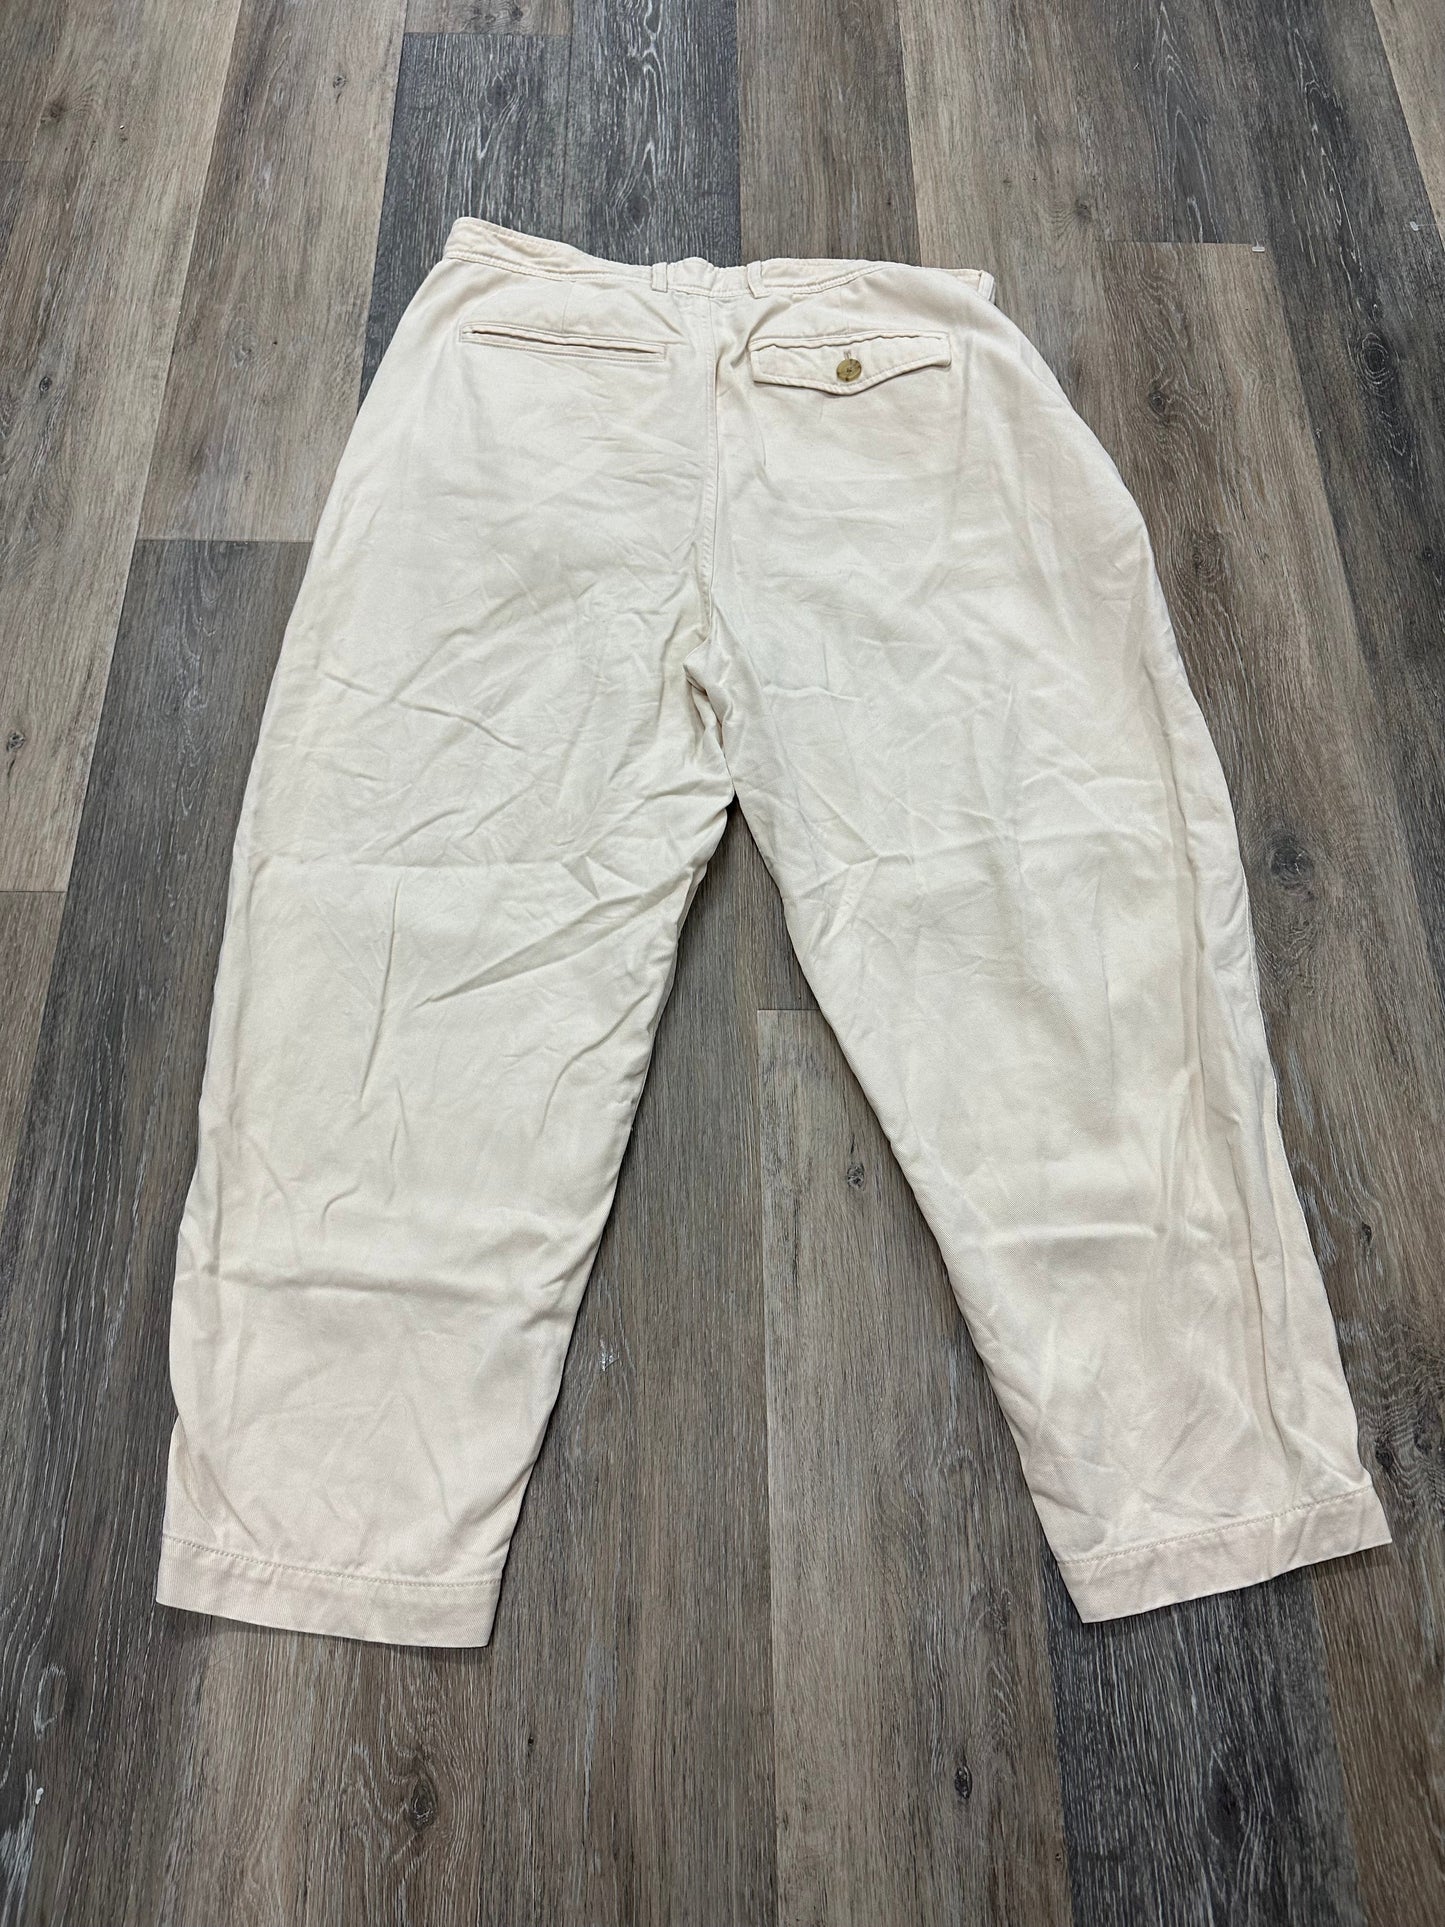 Pants Cargo & Utility By Everlane  Size: 16